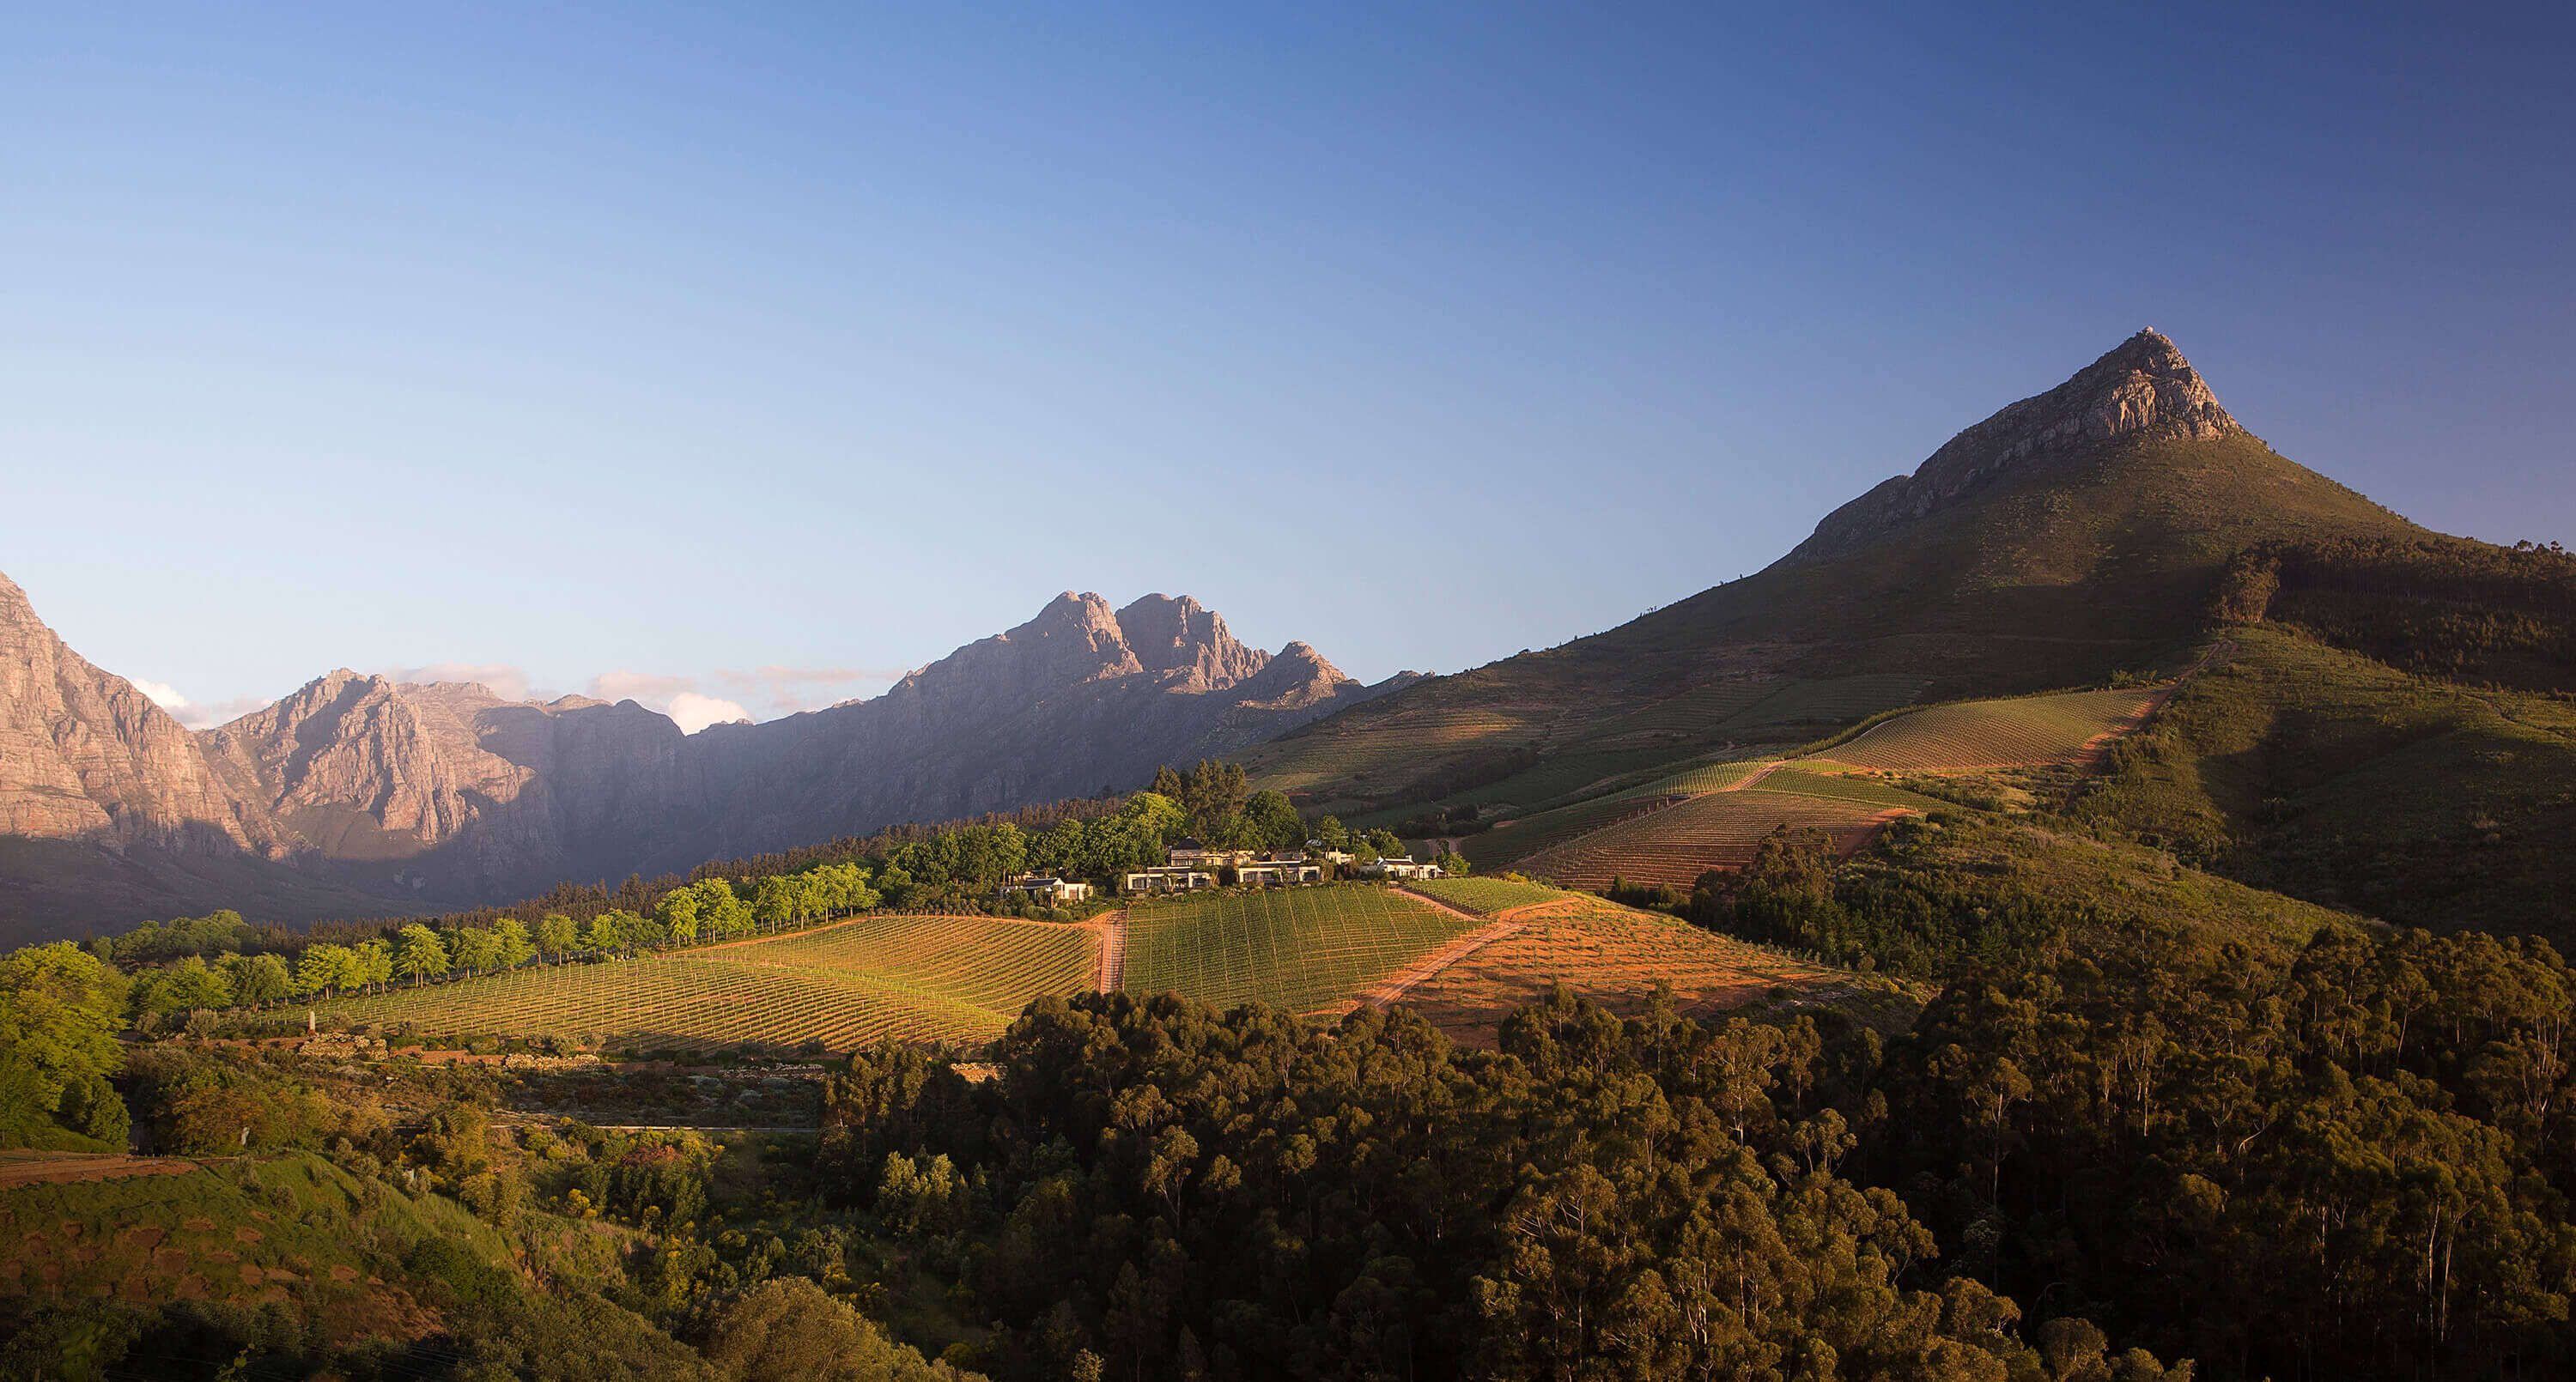 View of the Delaire Graff Estate in Stellenbosch, South Africa